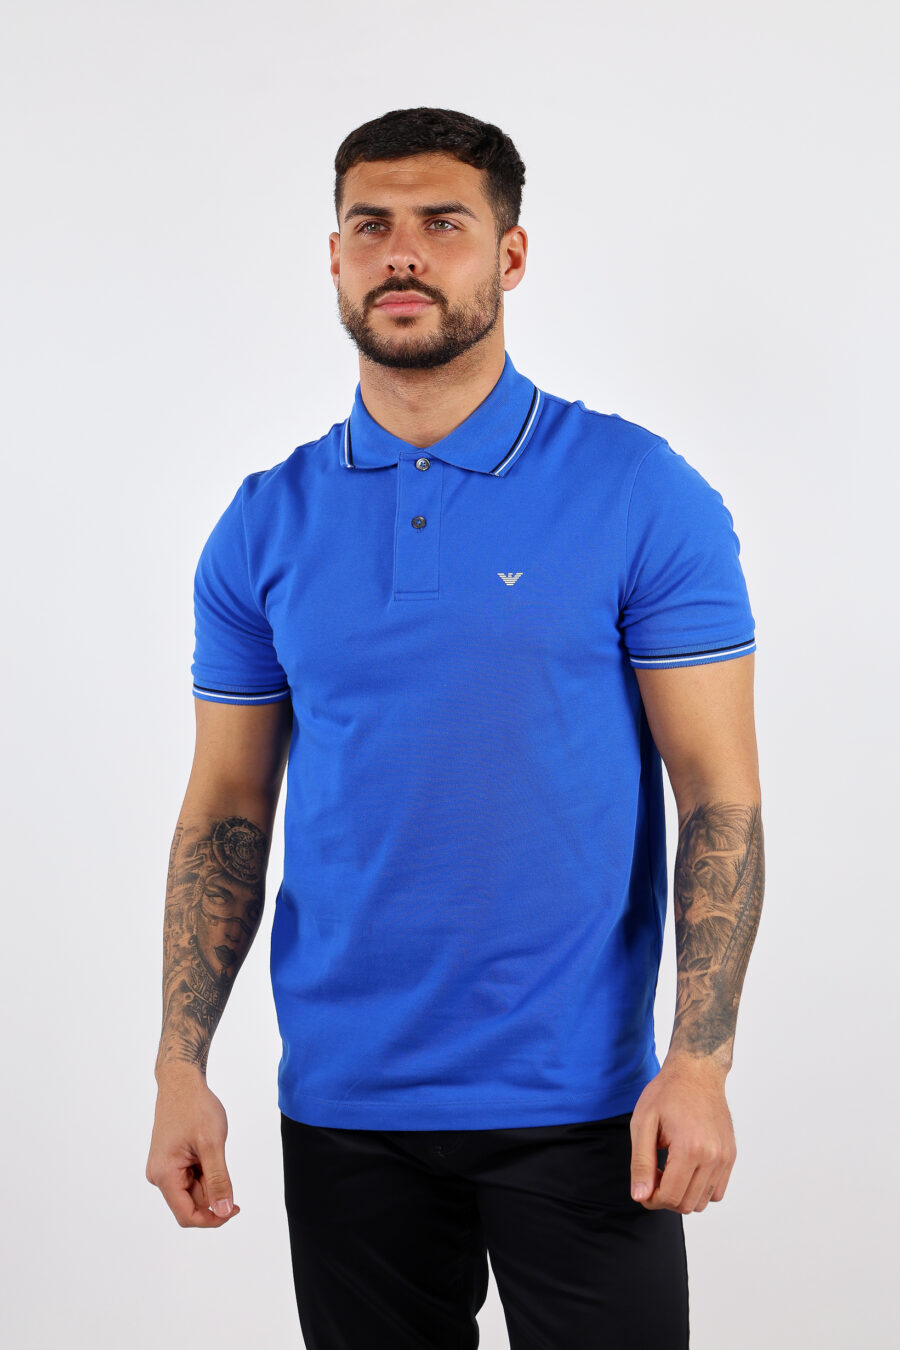 Blue knitted polo shirt with striped collar and mini eagle logo - BLS Fashion 55